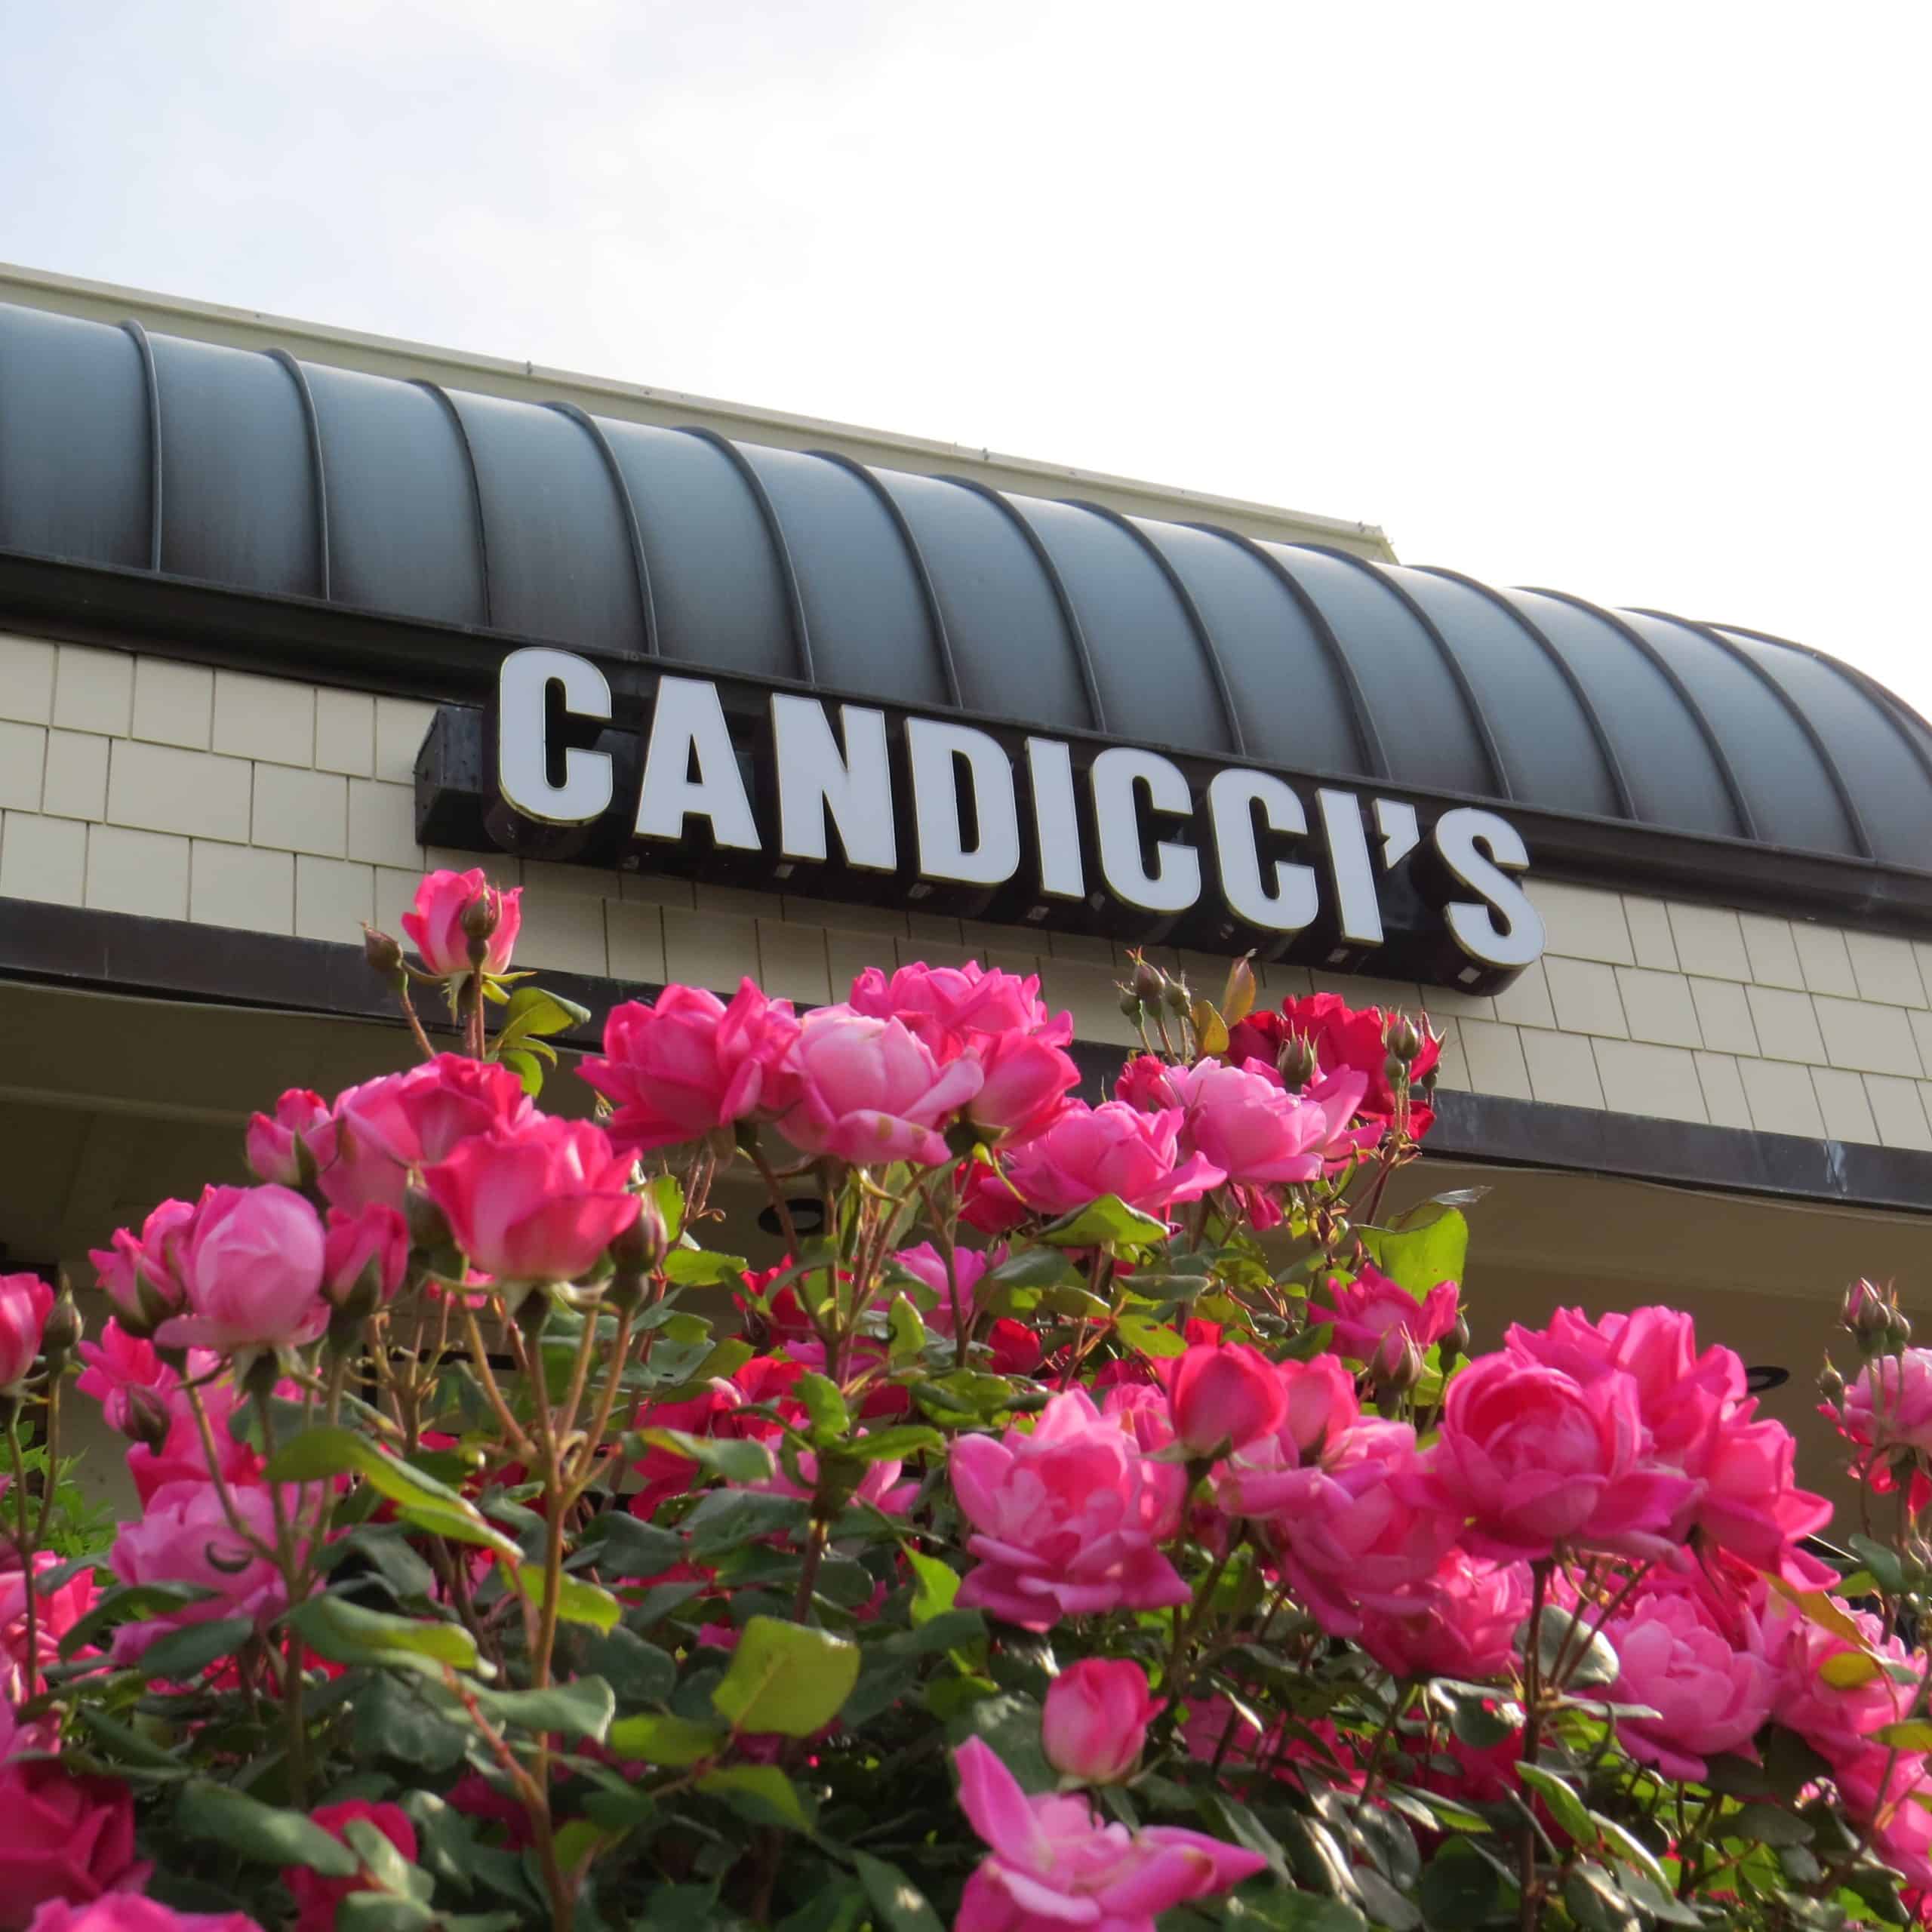 Candicci’s Restaurant launches new website with online ordering